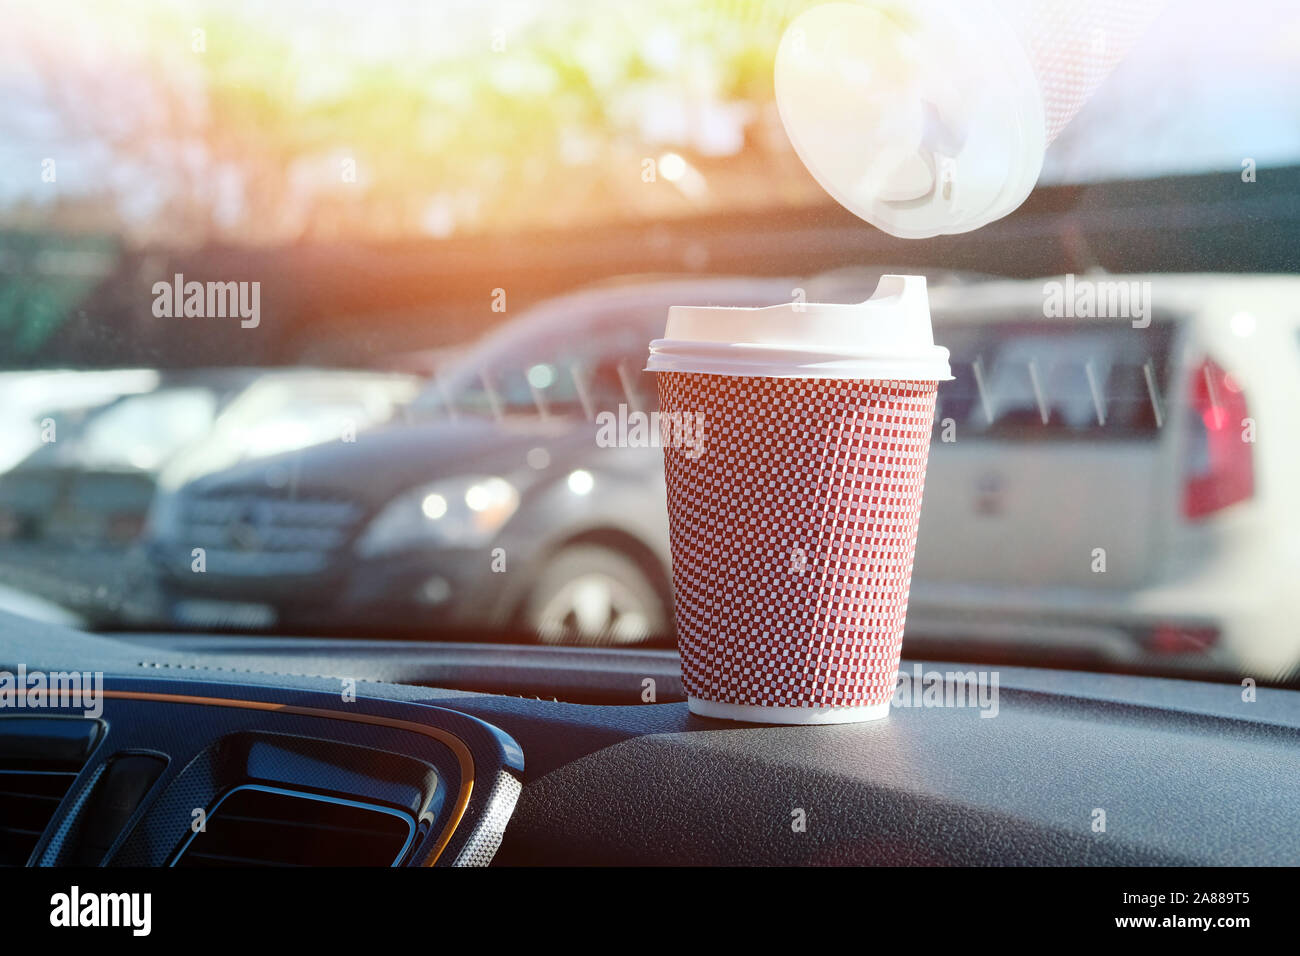 Paper cup with tea or coffee in car on sunny blurred background. Takeaway. Morning breakfast in auto. Stock Photo